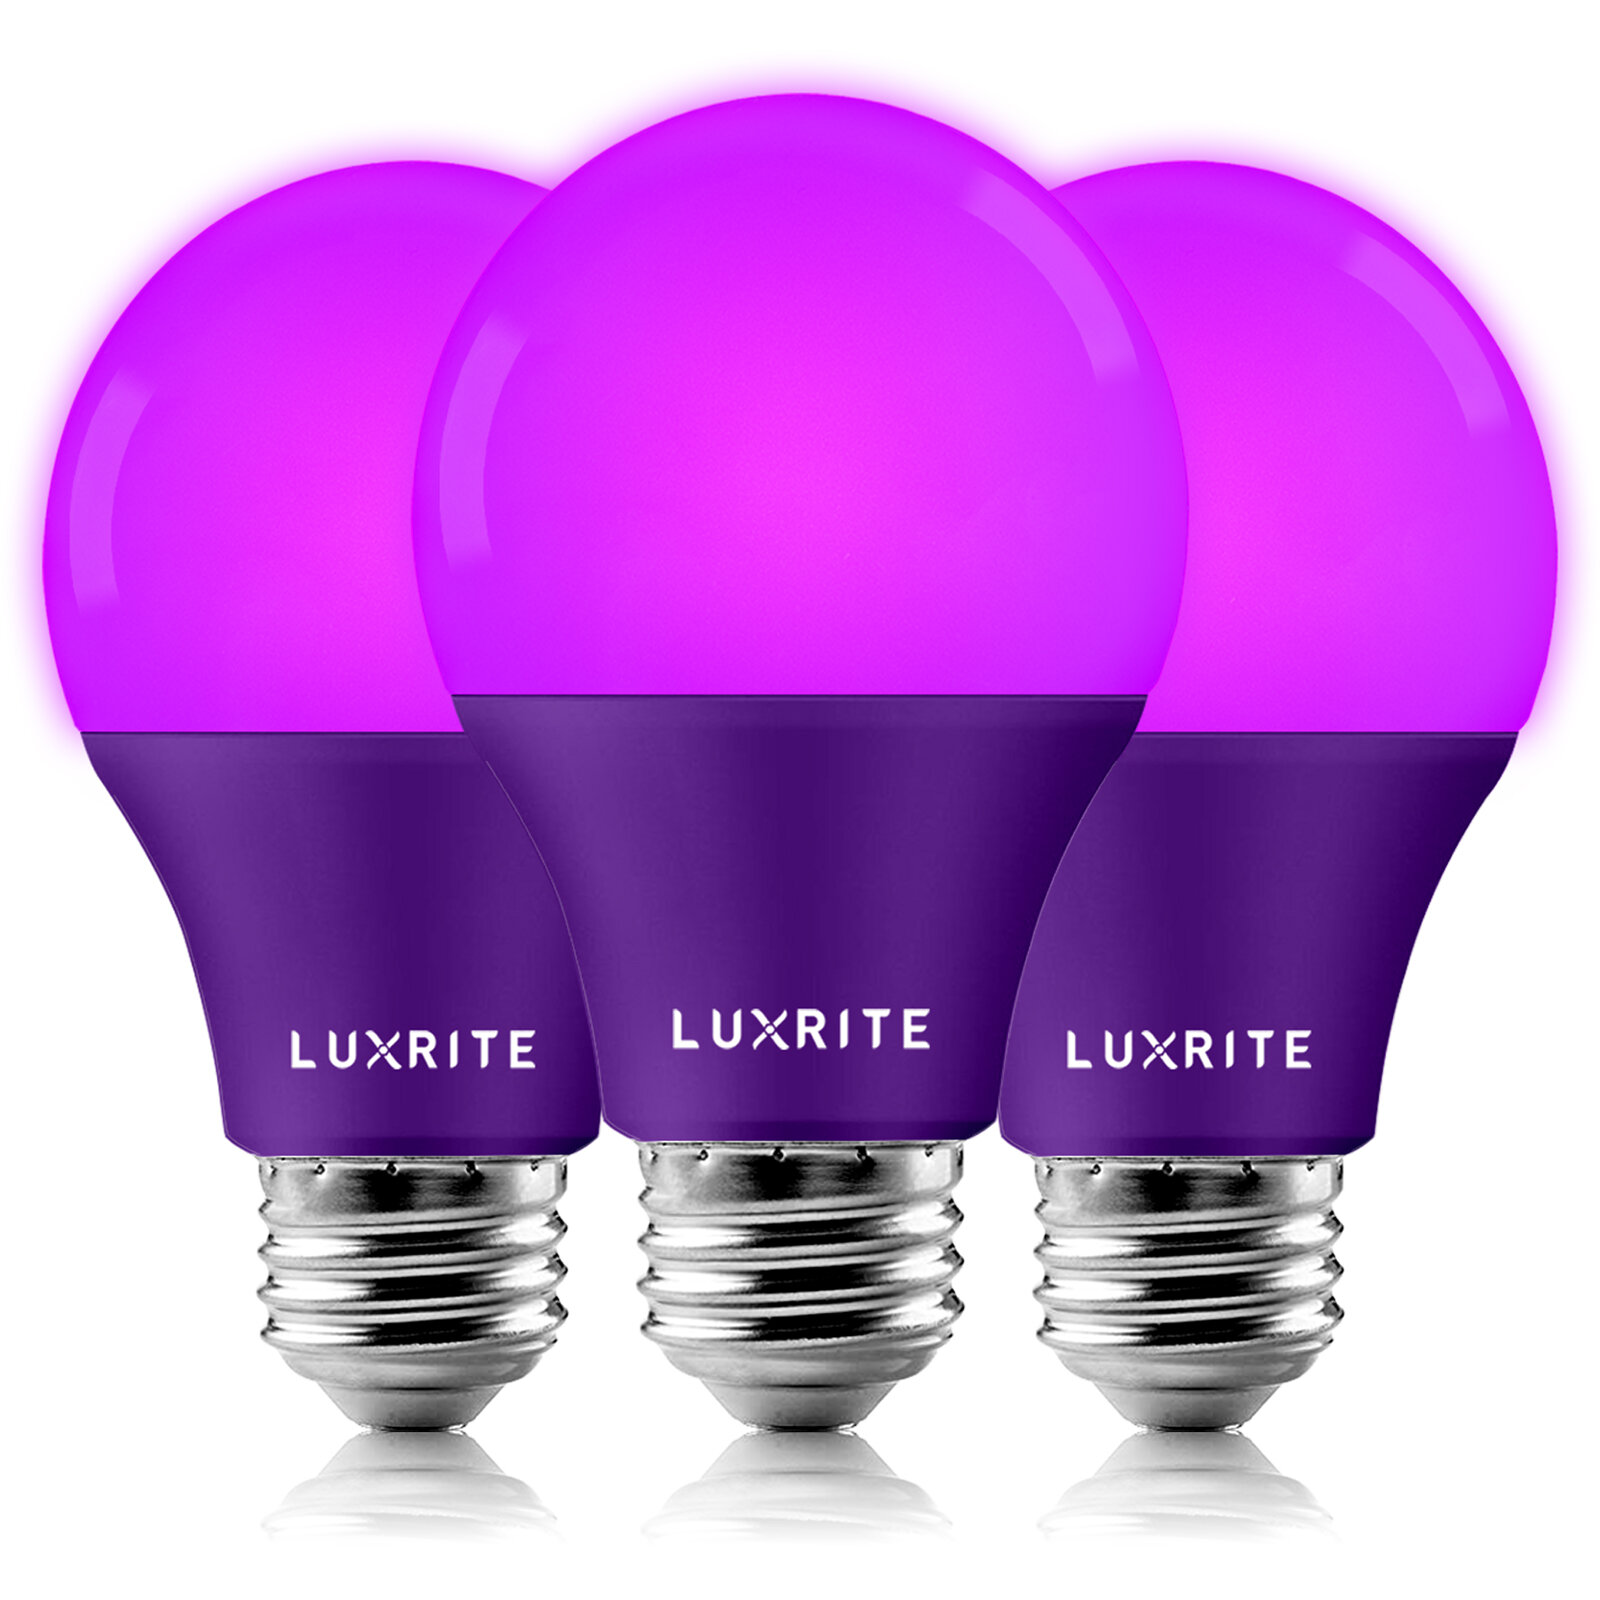 Luxrite A19 LED Purple Light Bulbs 60W Equivalent Non-Dimmable UL Listed E26 Base Indoor Outdoor Holiday Event Home (3 Pack) Reviews | Wayfair